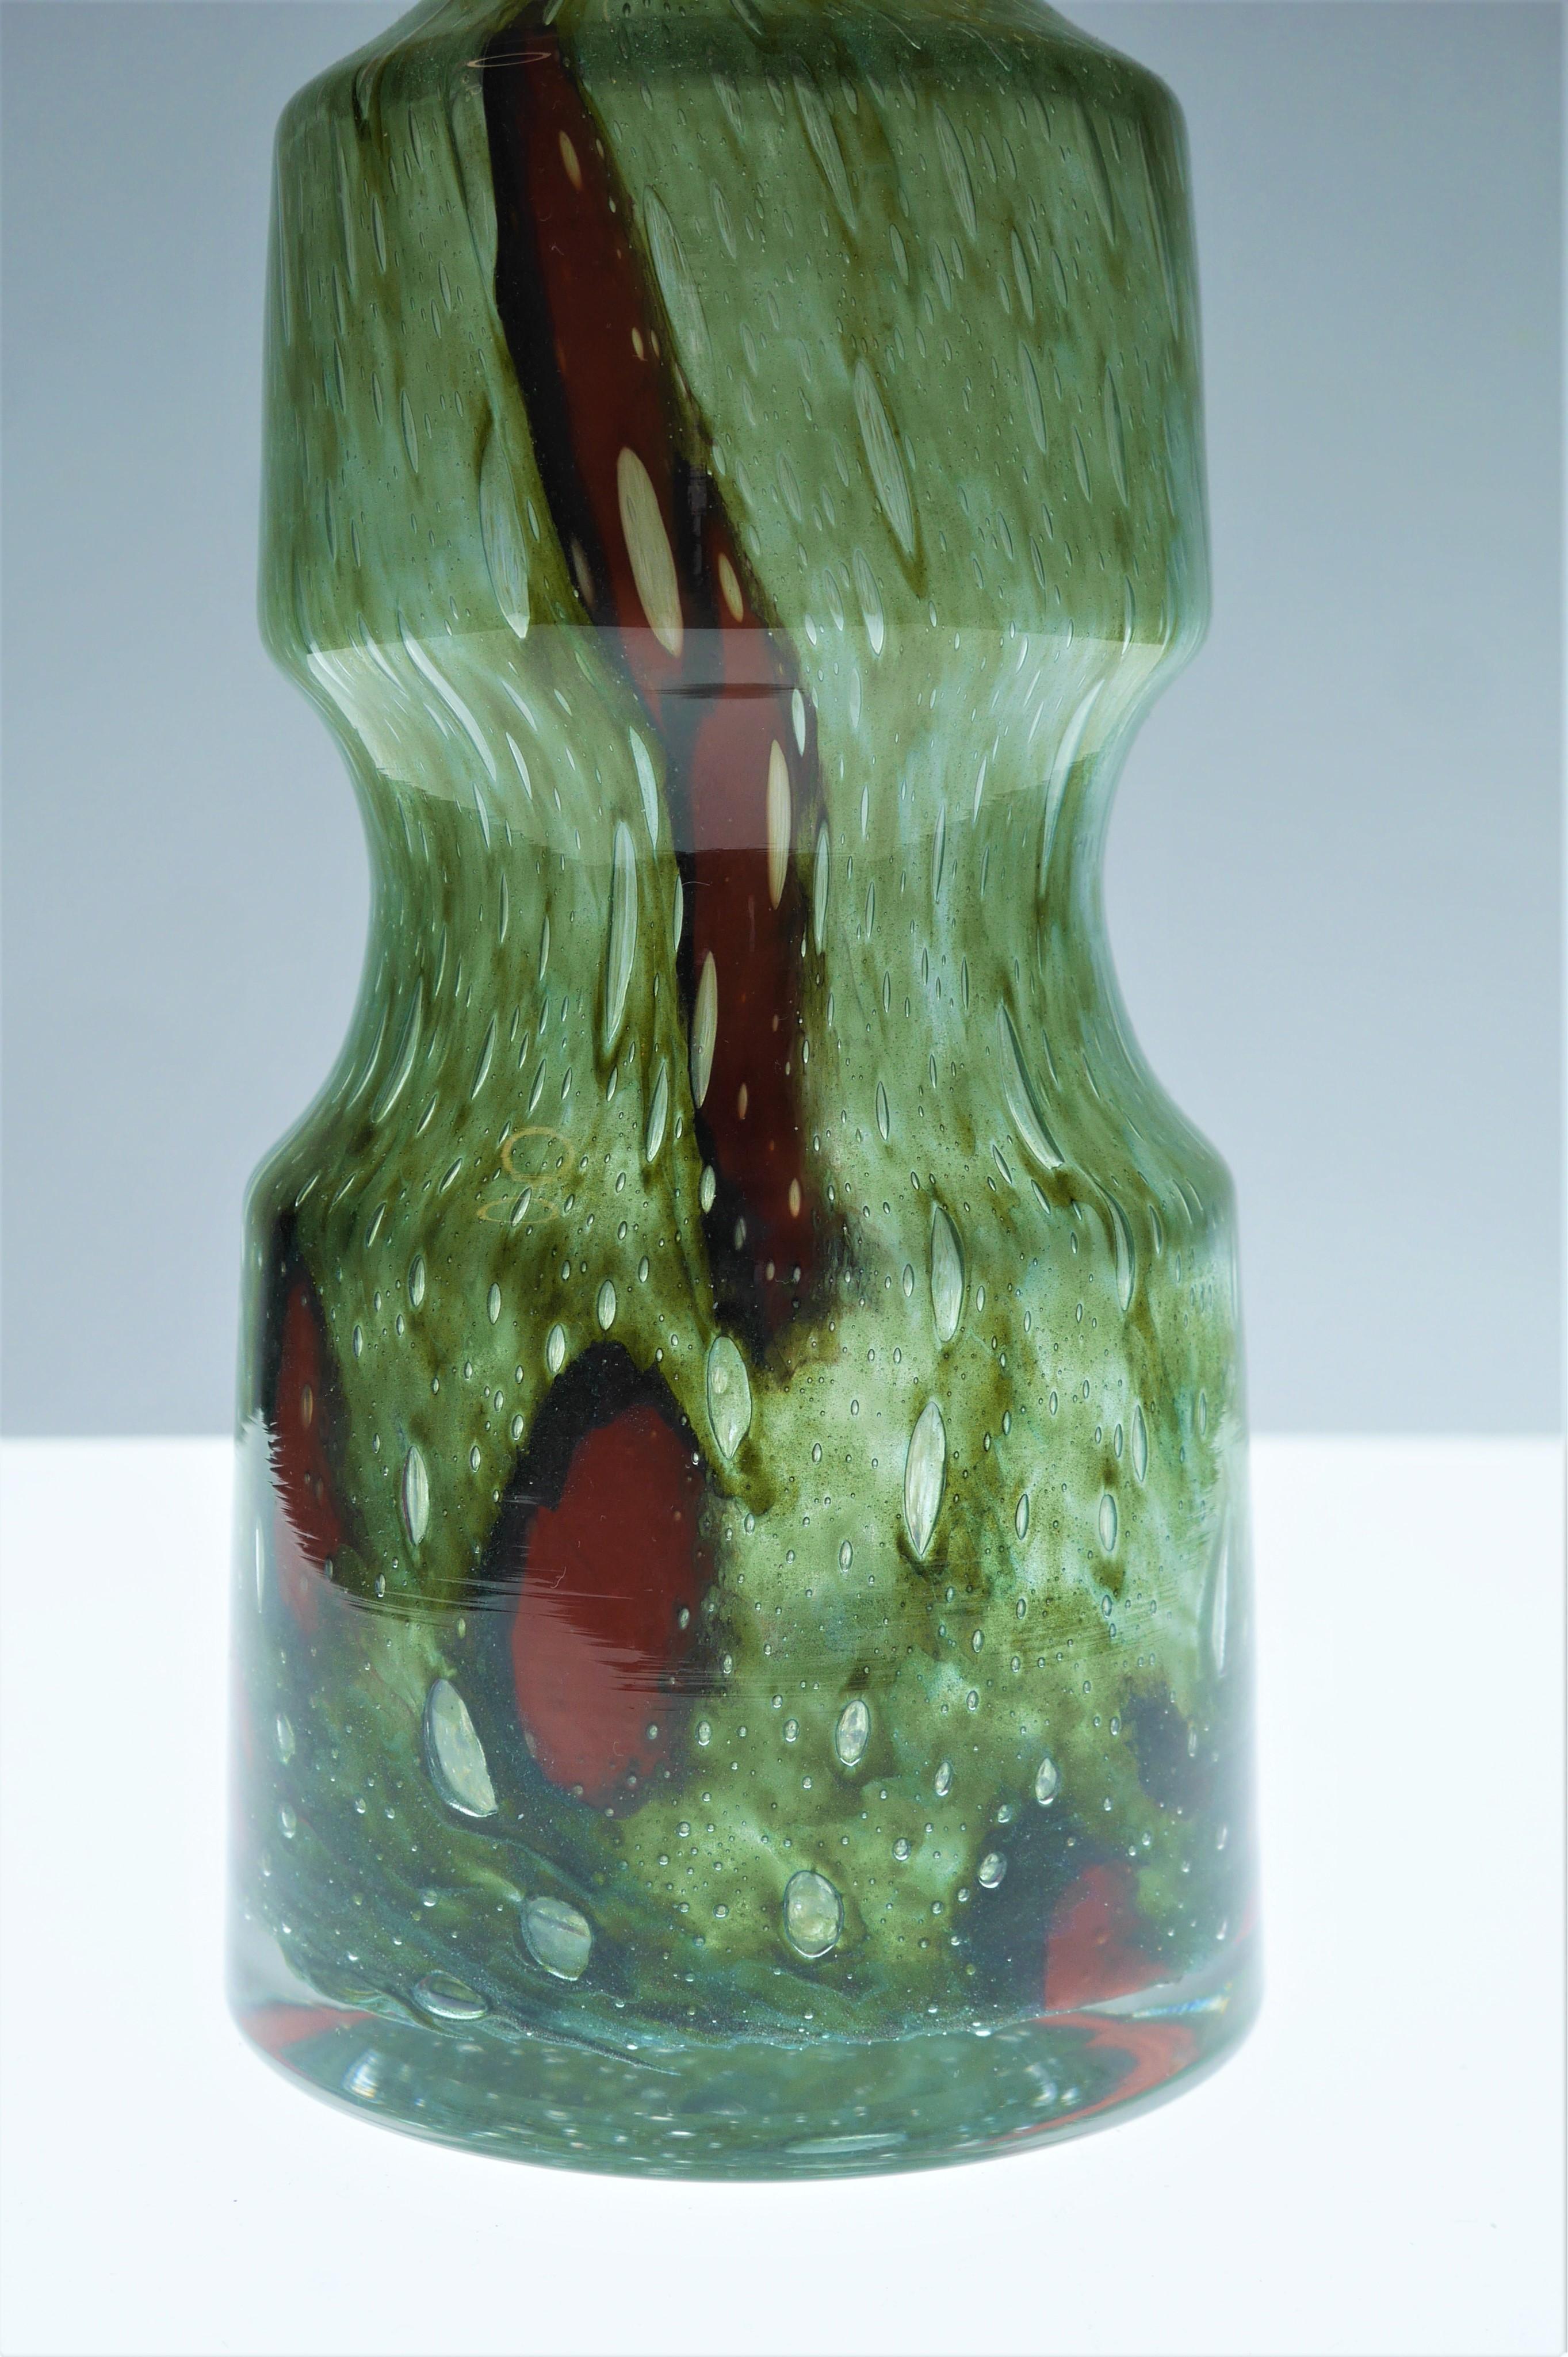 Stunning, iridescent green glass 'Flora' vase with red and black details. Made by Frantisek Koudelka for Prachen, Czech Republic, 1970s. 
From the Mid-Century but has a Bohemian design with air bubbles integrated into the colour flow. František